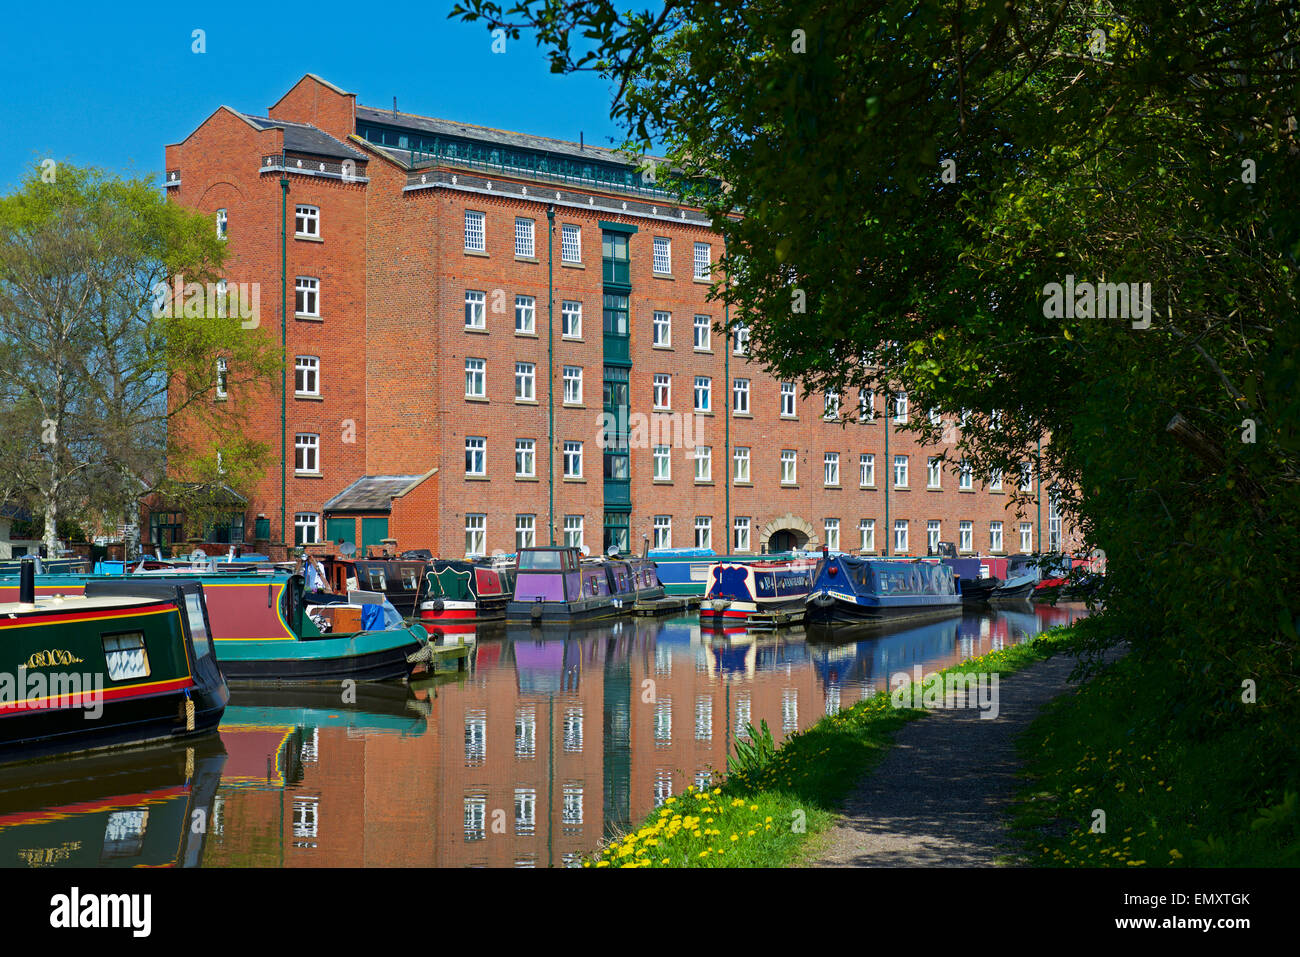 The Macclesfield Canal in Macclesfield, Cheshire, England UK Stock Photo